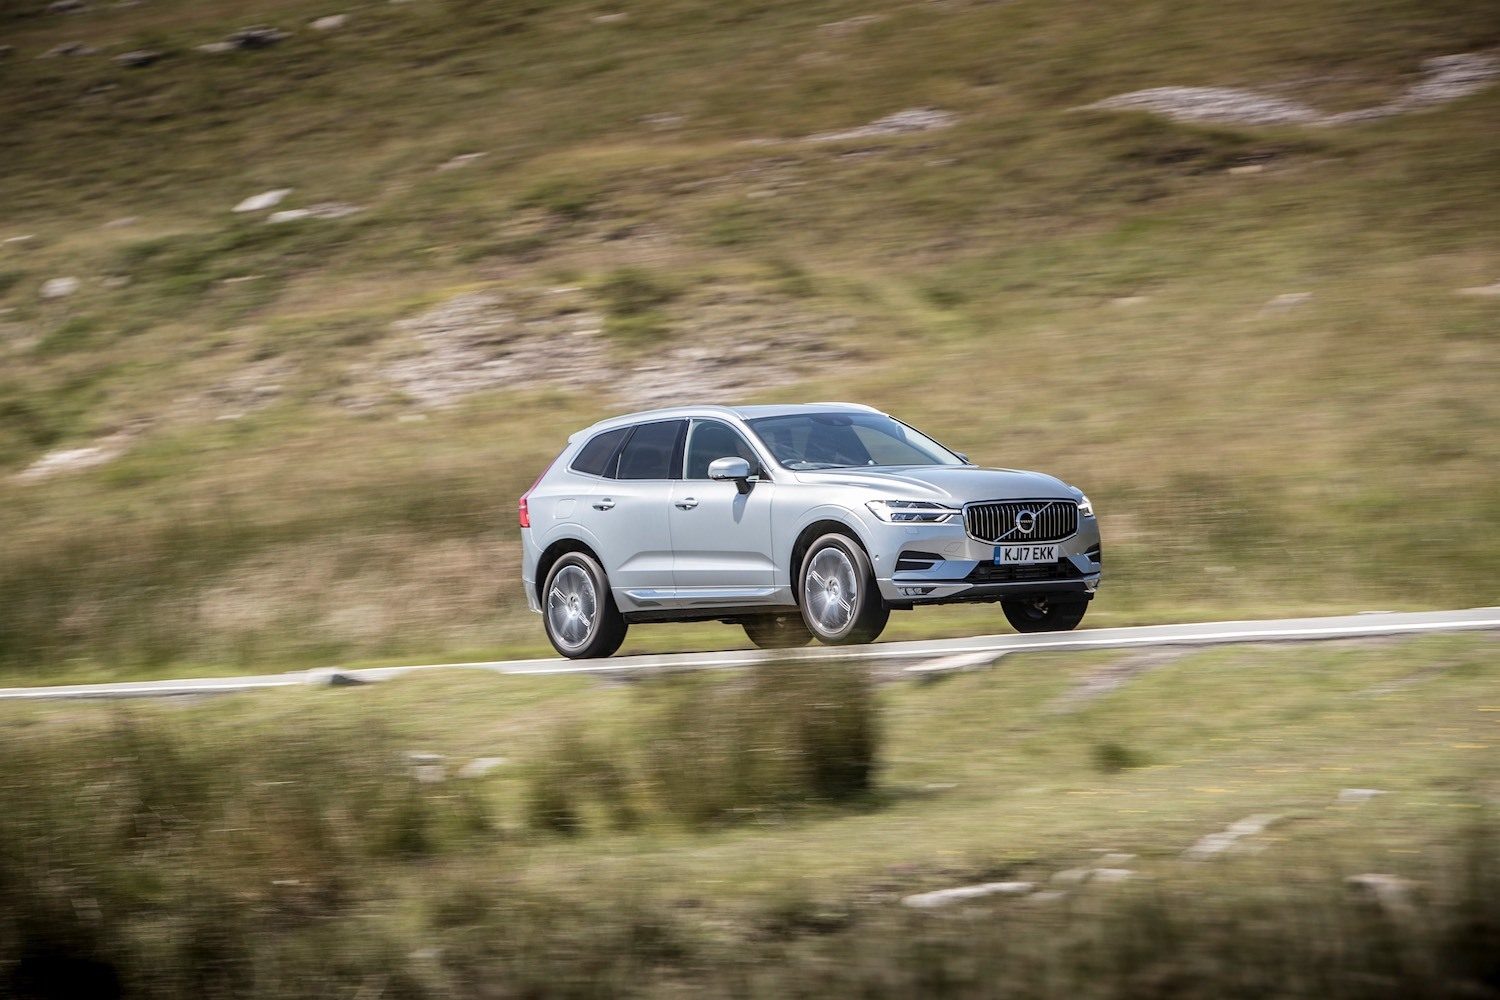 Neil Lyndon reviews the All New Volvo XC60 for Drive 16